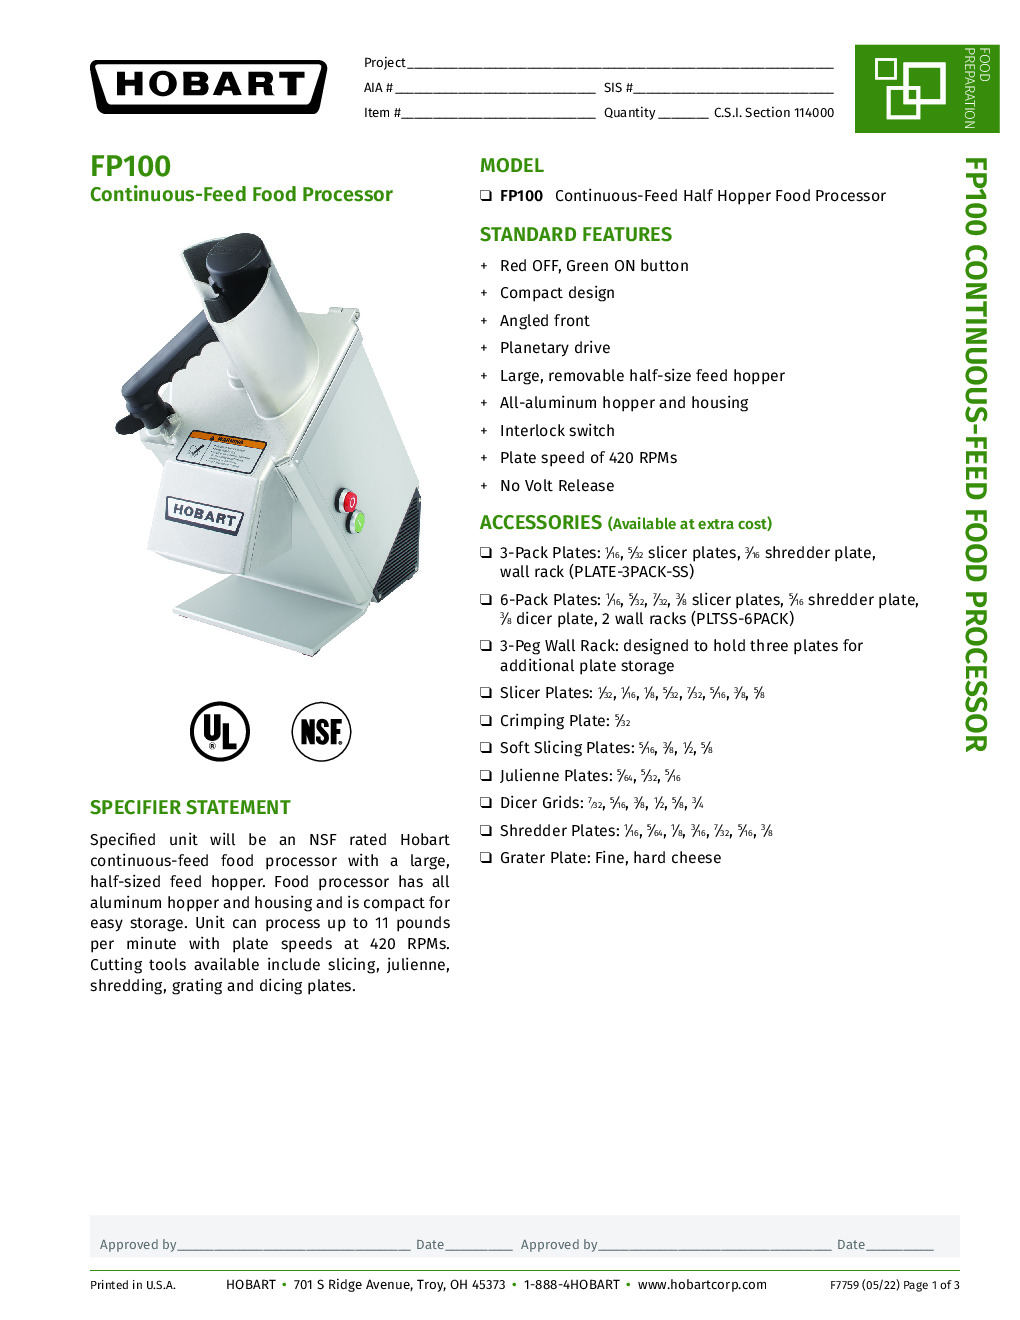 Hobart FP100-1 Benchtop Continuous Feed Food Processor, Unit Only, Half Size Hopper, 11 Ib Per Minute, 1/3 hp, 120v/60/1-ph